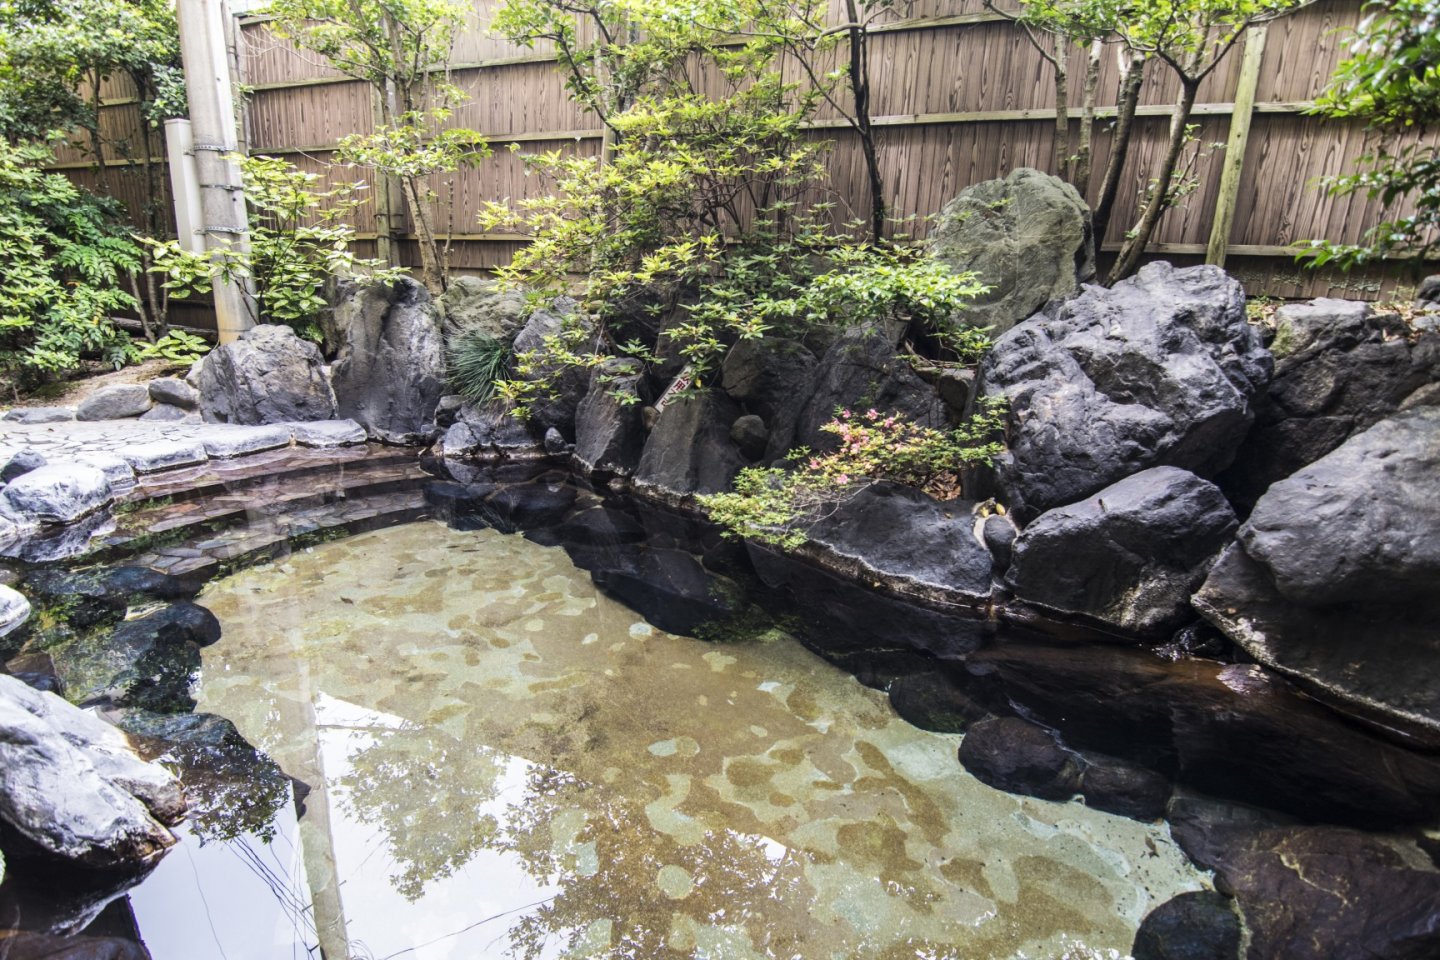 Yet another beautiful outdoor pool, this one in Hosei-kan. Ryokans often open their onsen baths to visitors even if they are not staying guests.